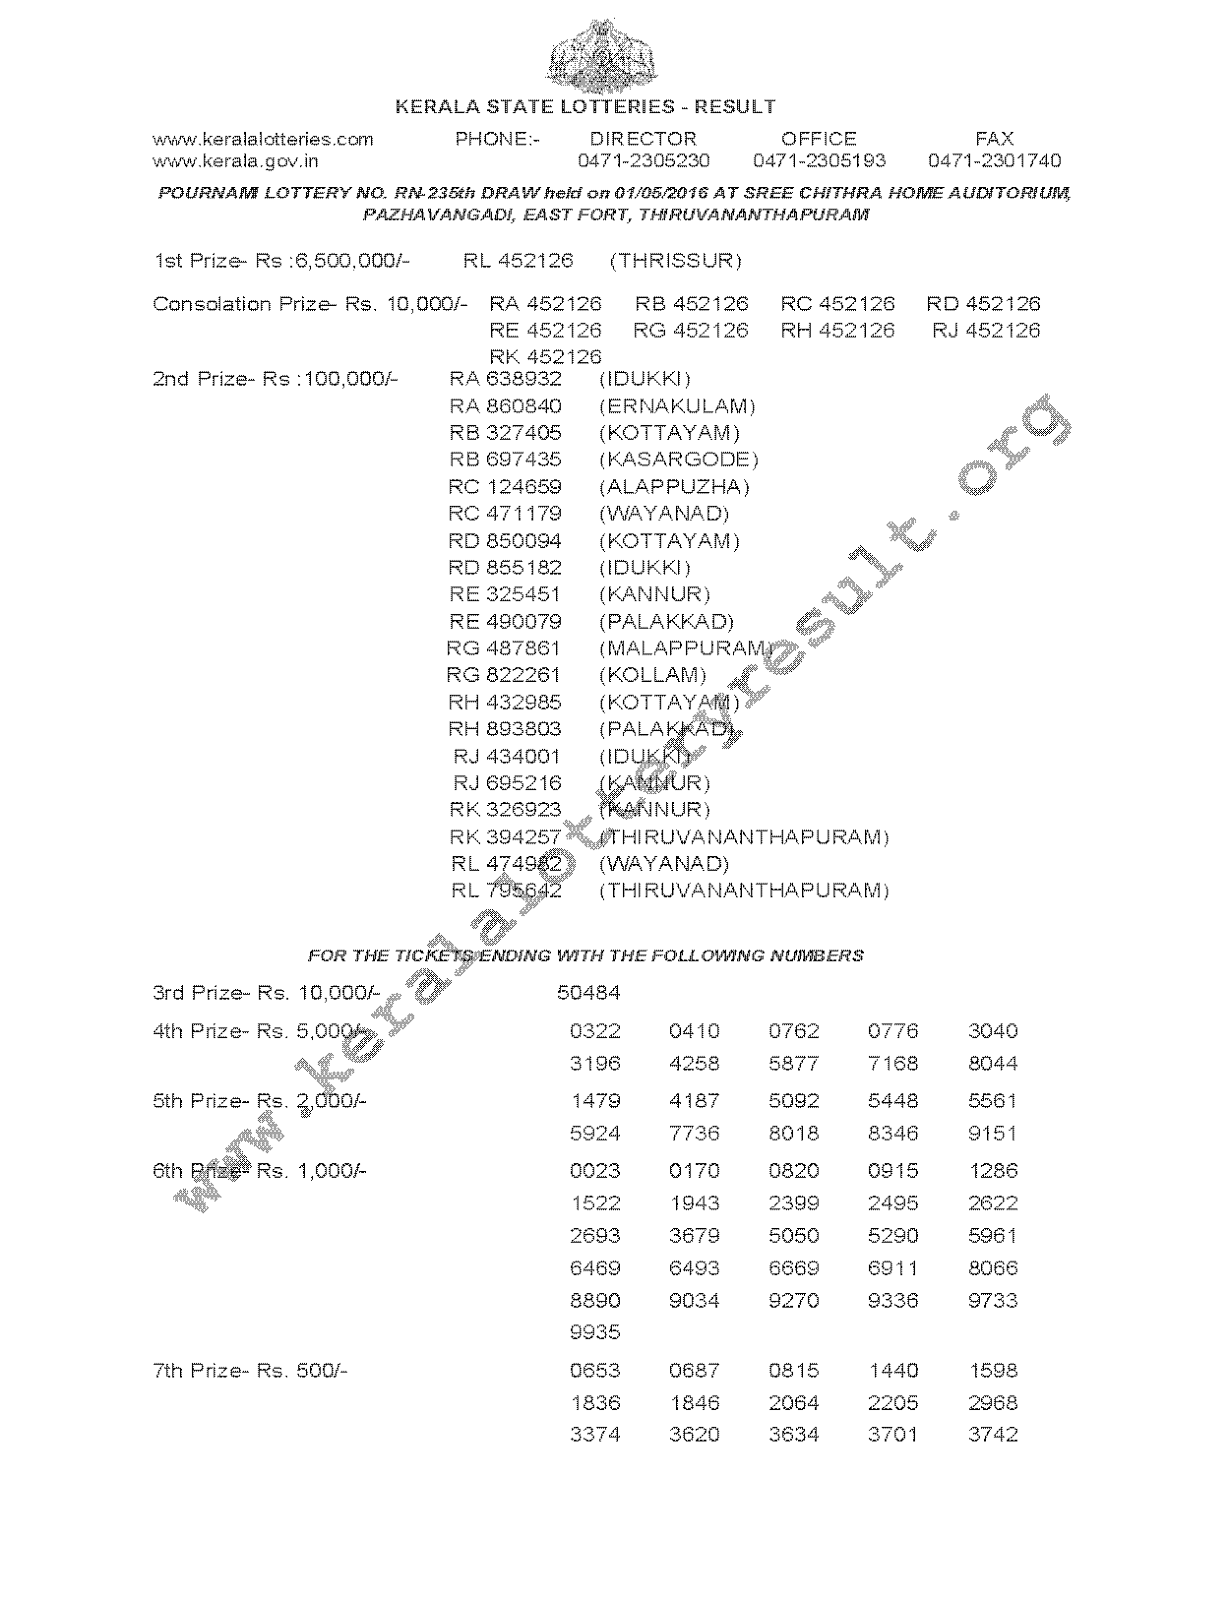 POURNAMI Lottery RN 235 Result 1-5-2016